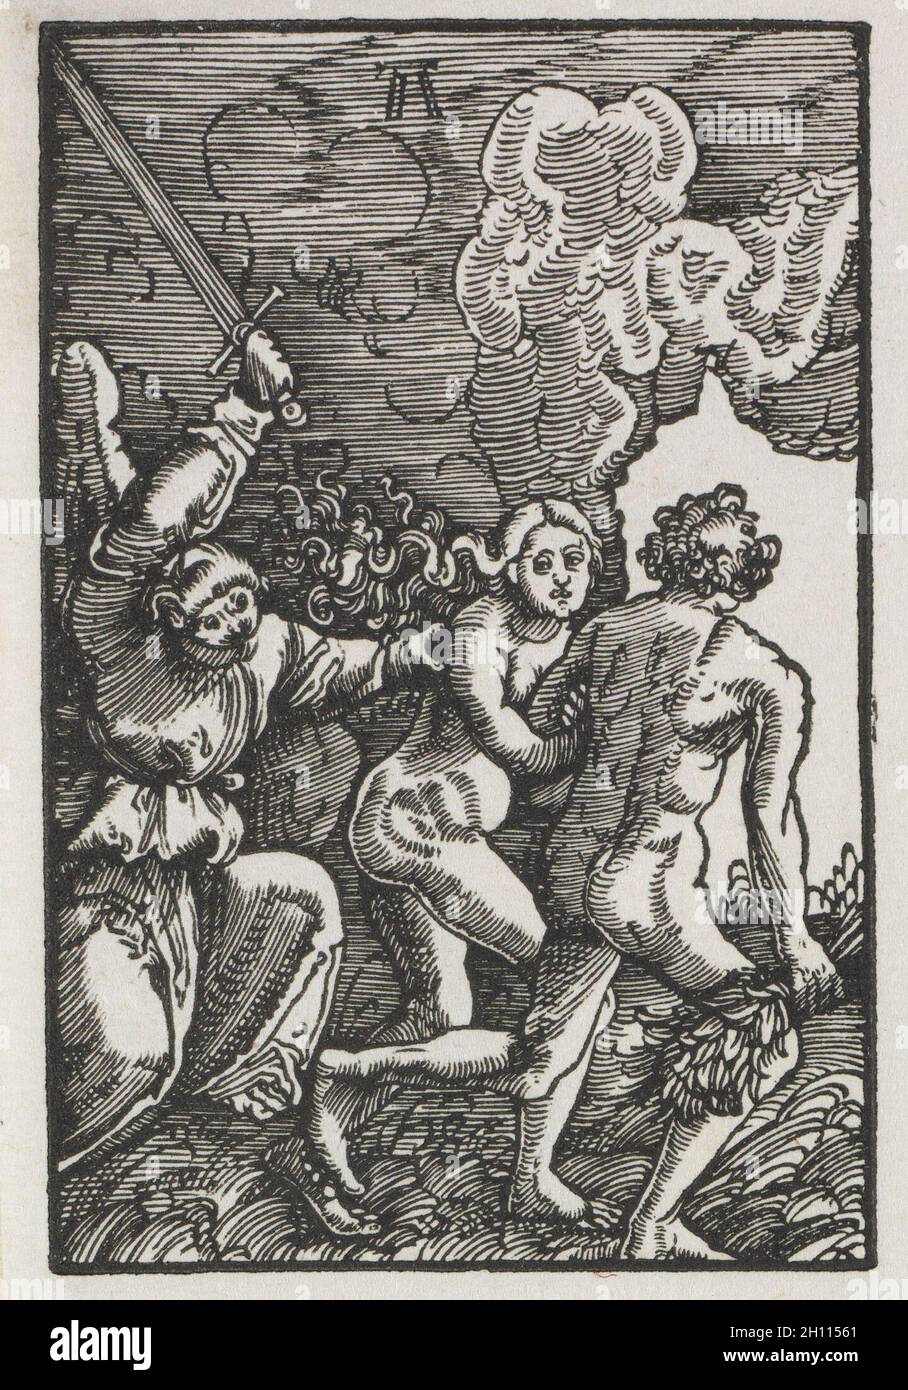 The Fall and Redemption of Man: The Expulsion from Eden, c. 1515. Albrecht Altdorfer (German, c. 1480-1538). Woodcut; Stock Photo